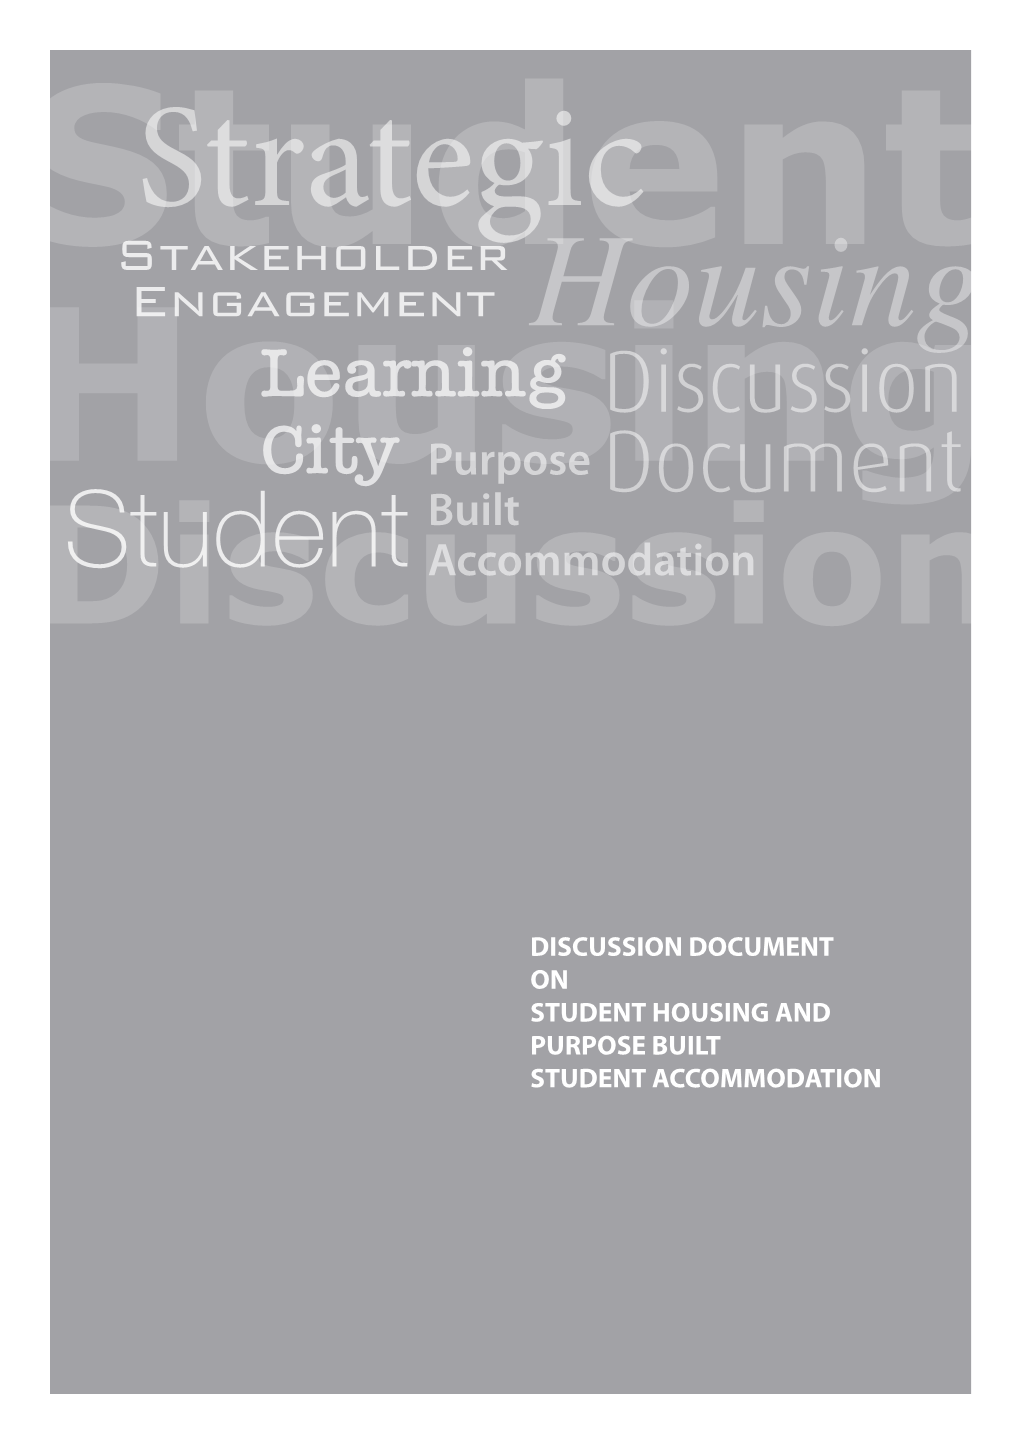 Studentstakeholder Engagement Housing Learning Discussion Housingcity Purpose Document Built Discussionstudent Accommodation